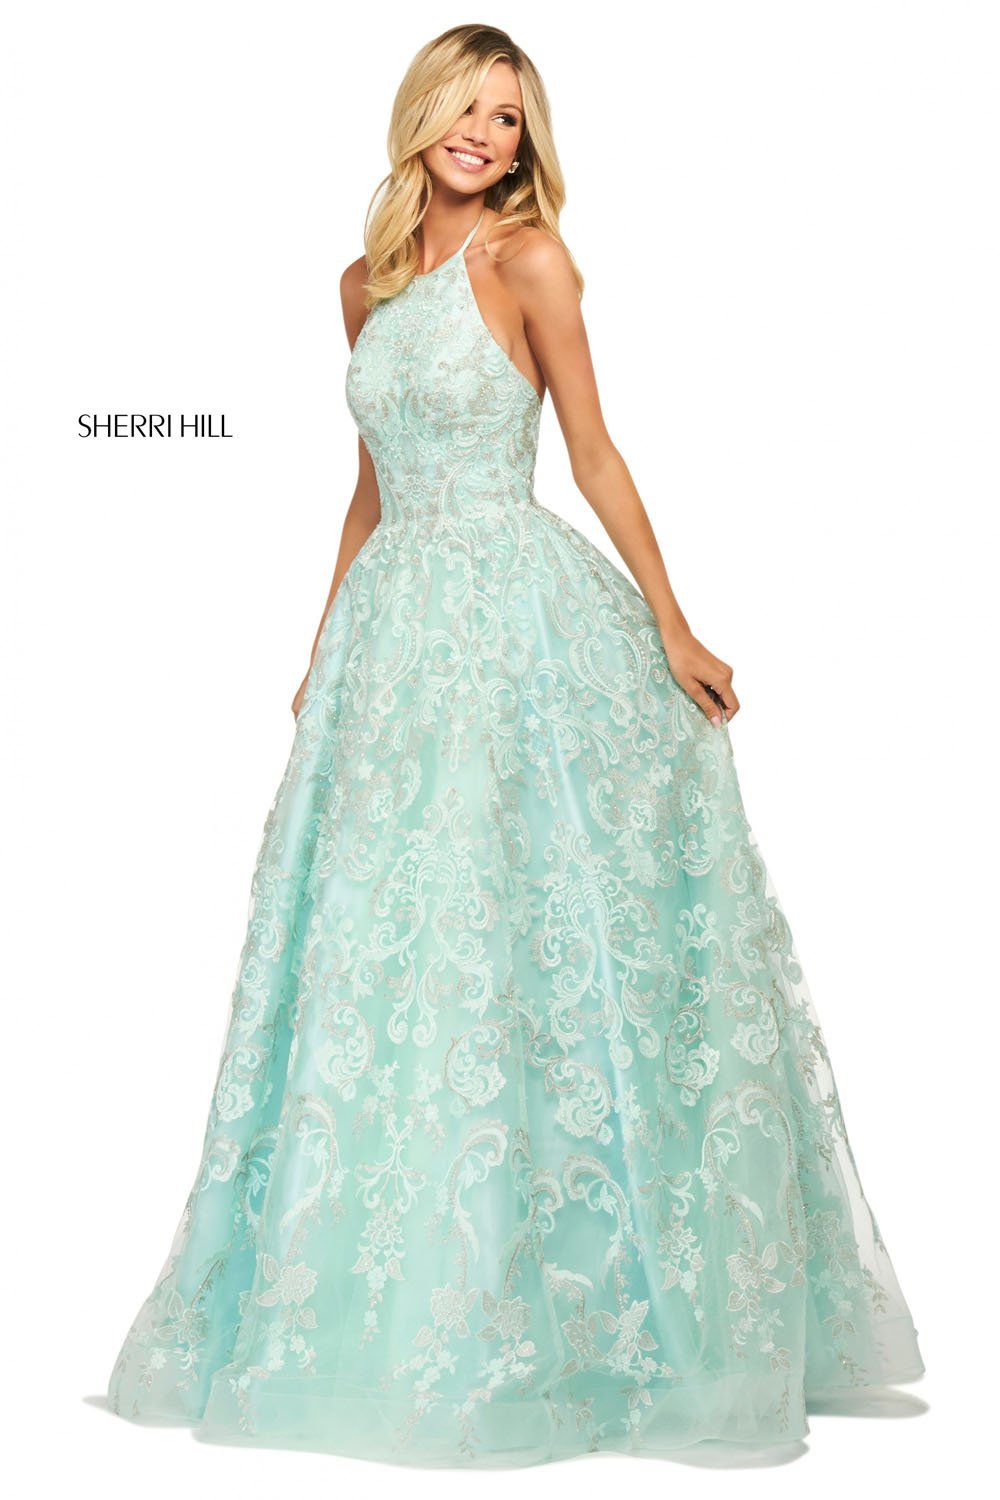 Sherri Hill 53688 dress images in these colors: Ivory, Periwinkle, Seafoam, Pink, Lilac.